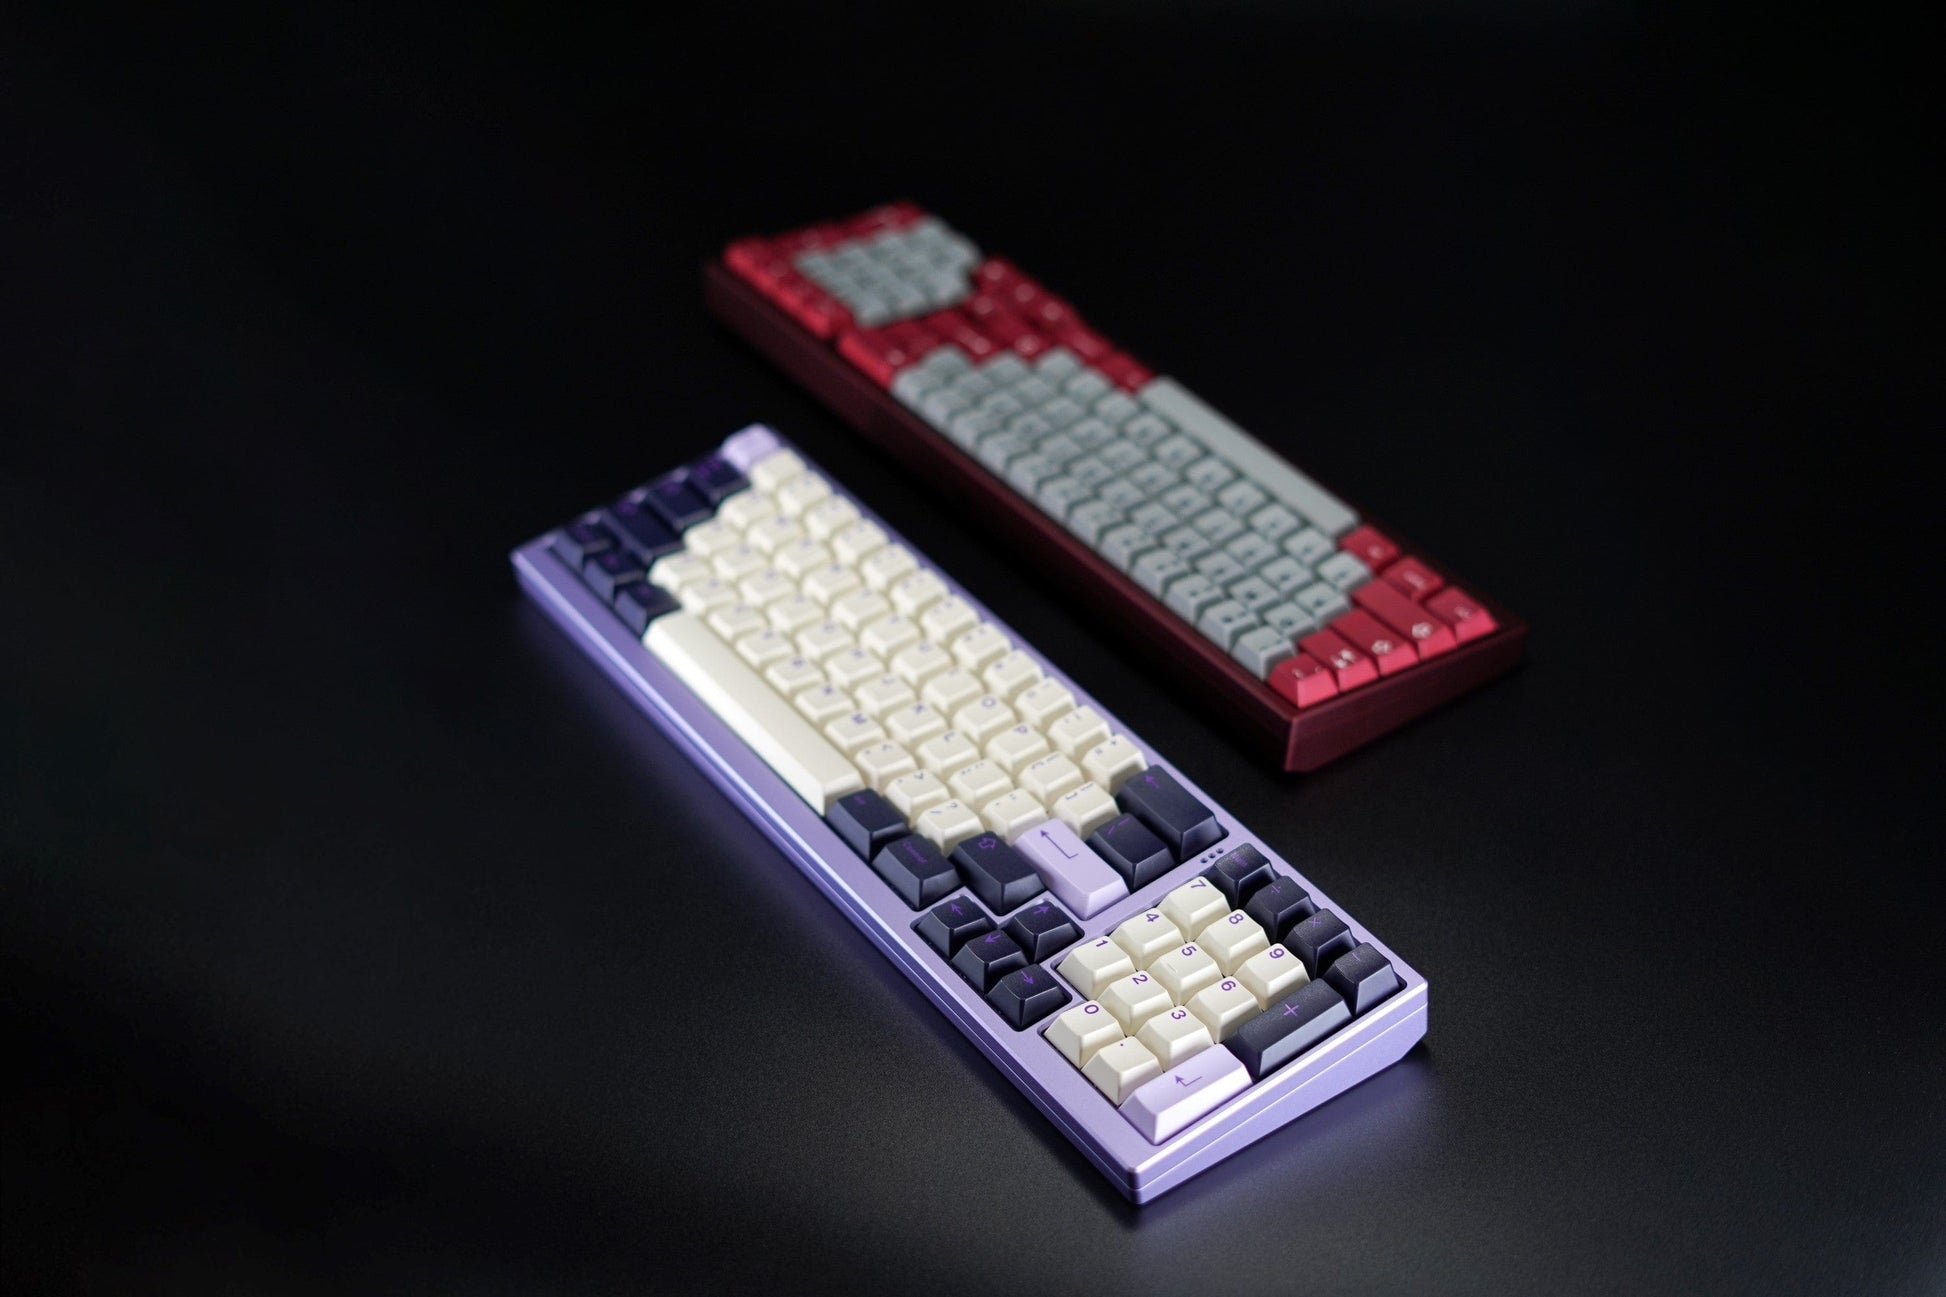 Cable Car Designs Cypher (R4) FRL Compact 1800 Keyboard Kit